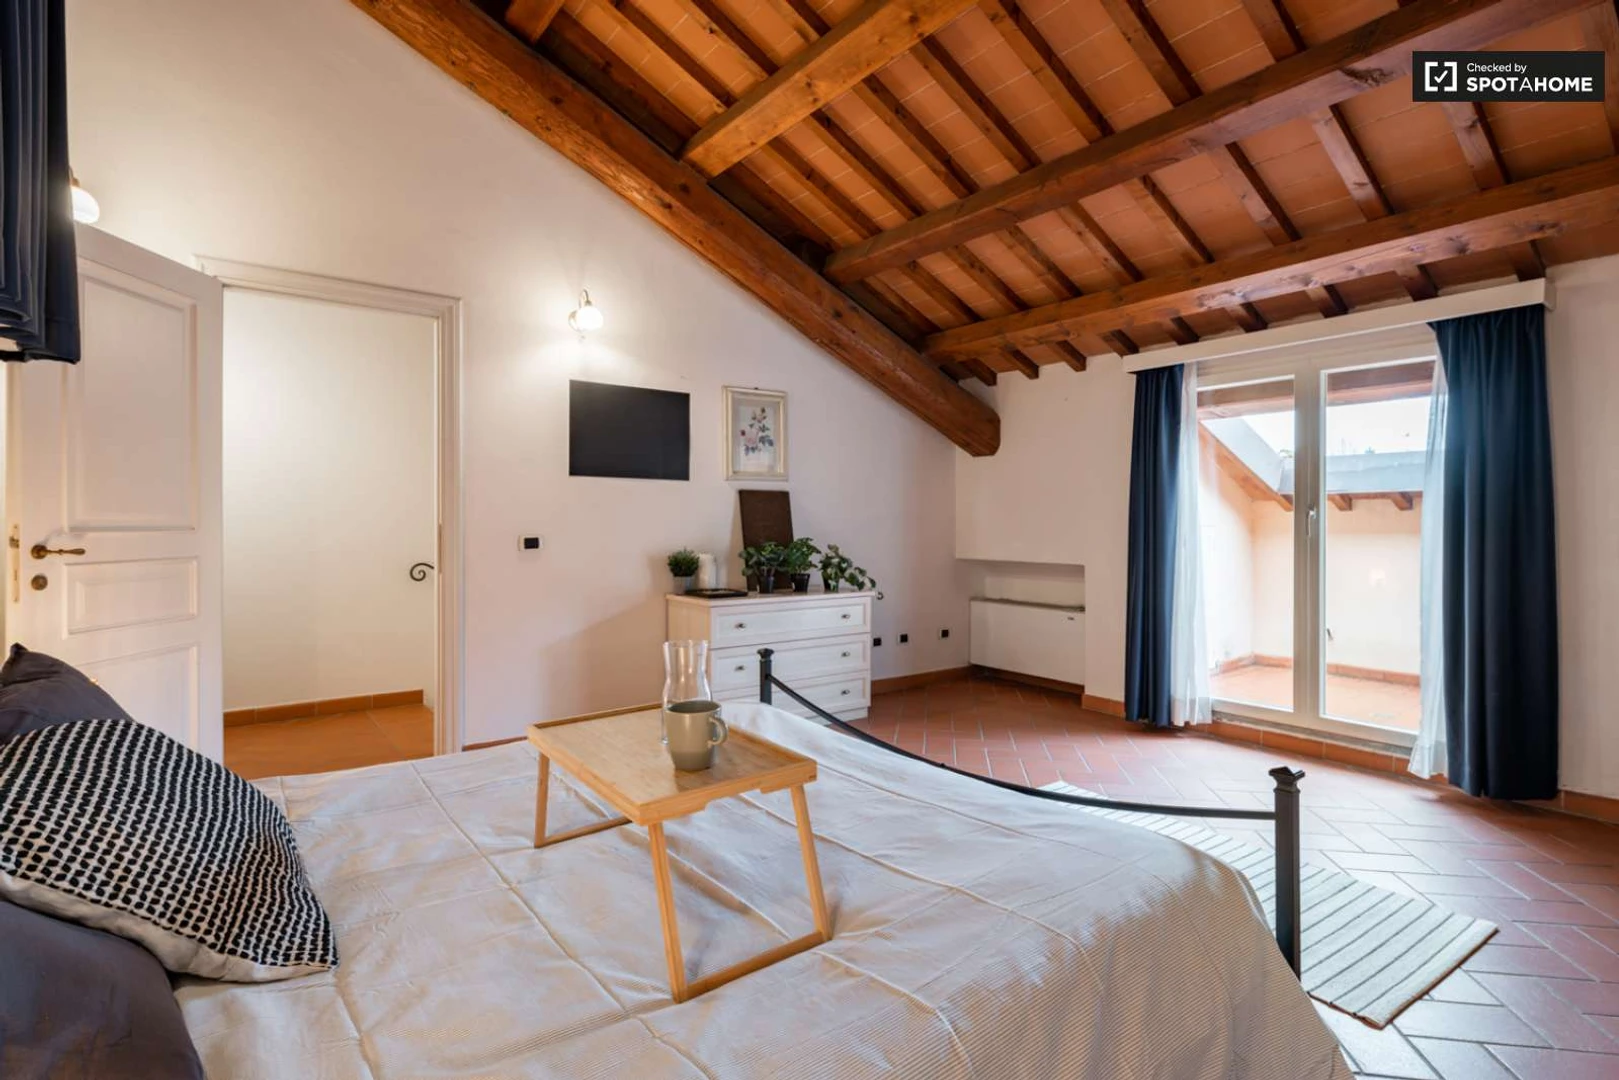 Accommodation with 3 bedrooms in firenze